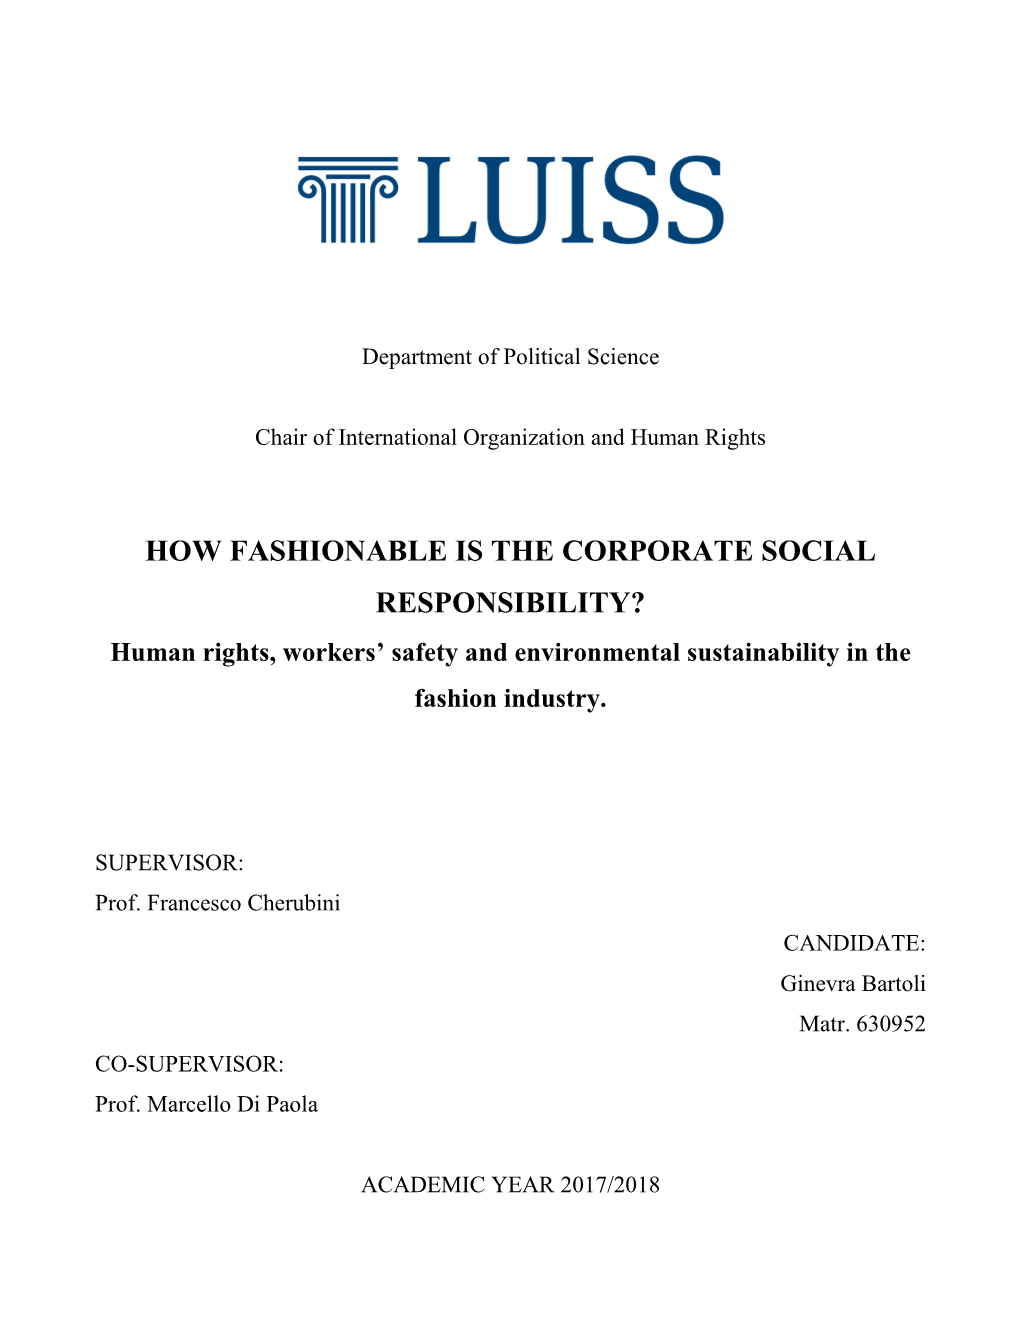 HOW FASHIONABLE IS the CORPORATE SOCIAL RESPONSIBILITY? Human Rights, Workers’ Safety and Environmental Sustainability in the Fashion Industry